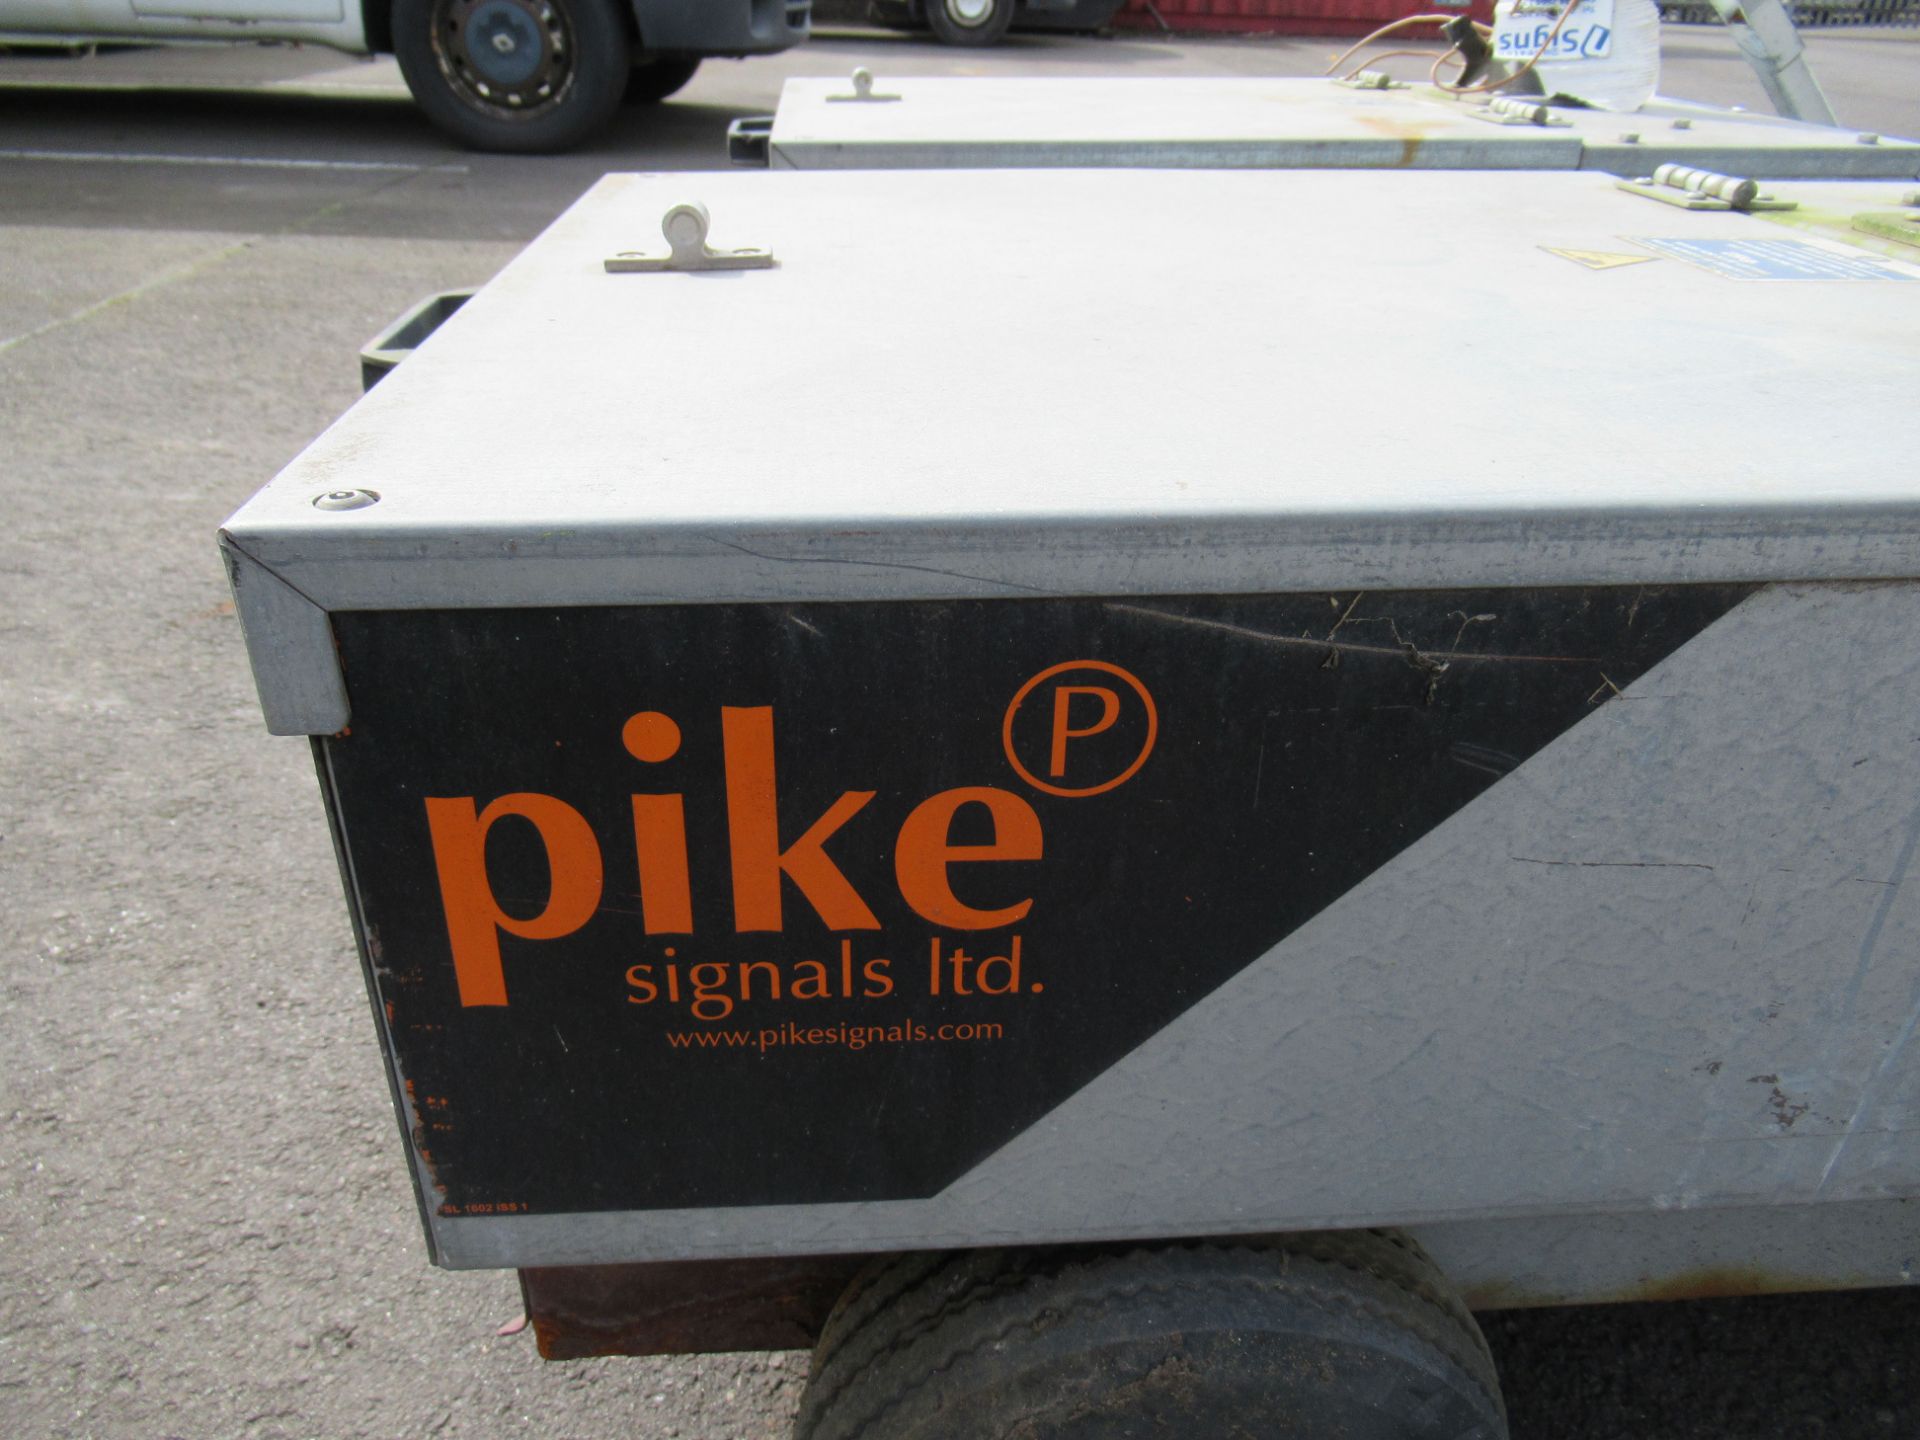 A Pair of Pike Signals Ltd "Vehicle" Battery Powered Portable Traffic Light Units - Image 3 of 7